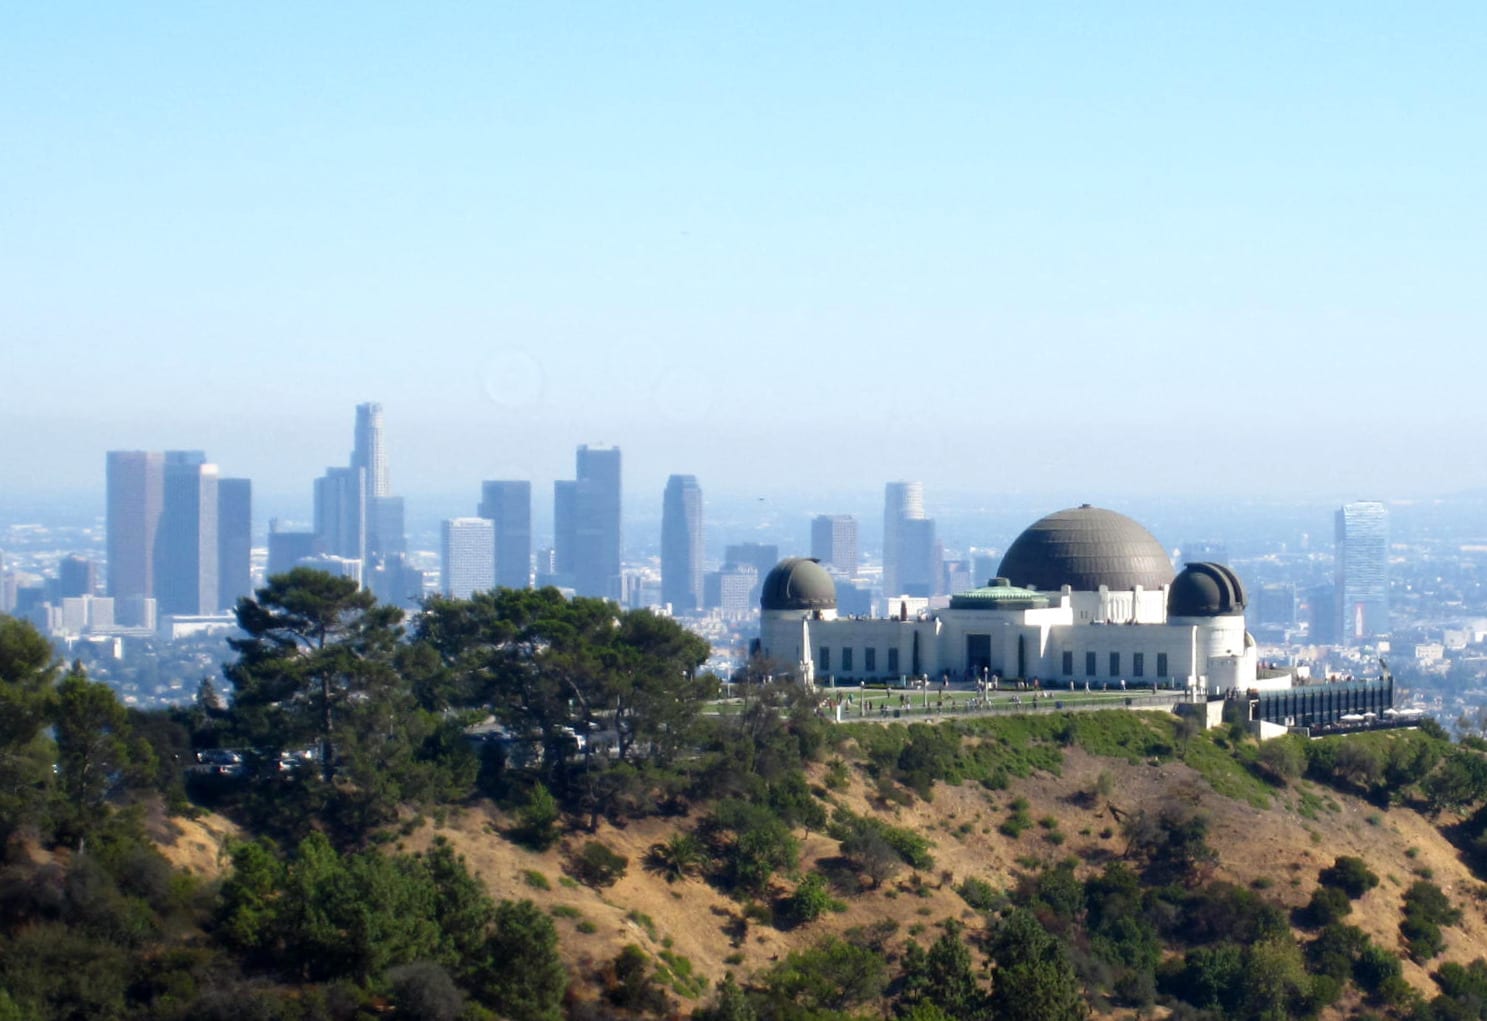 Griffith-Park-Observatory